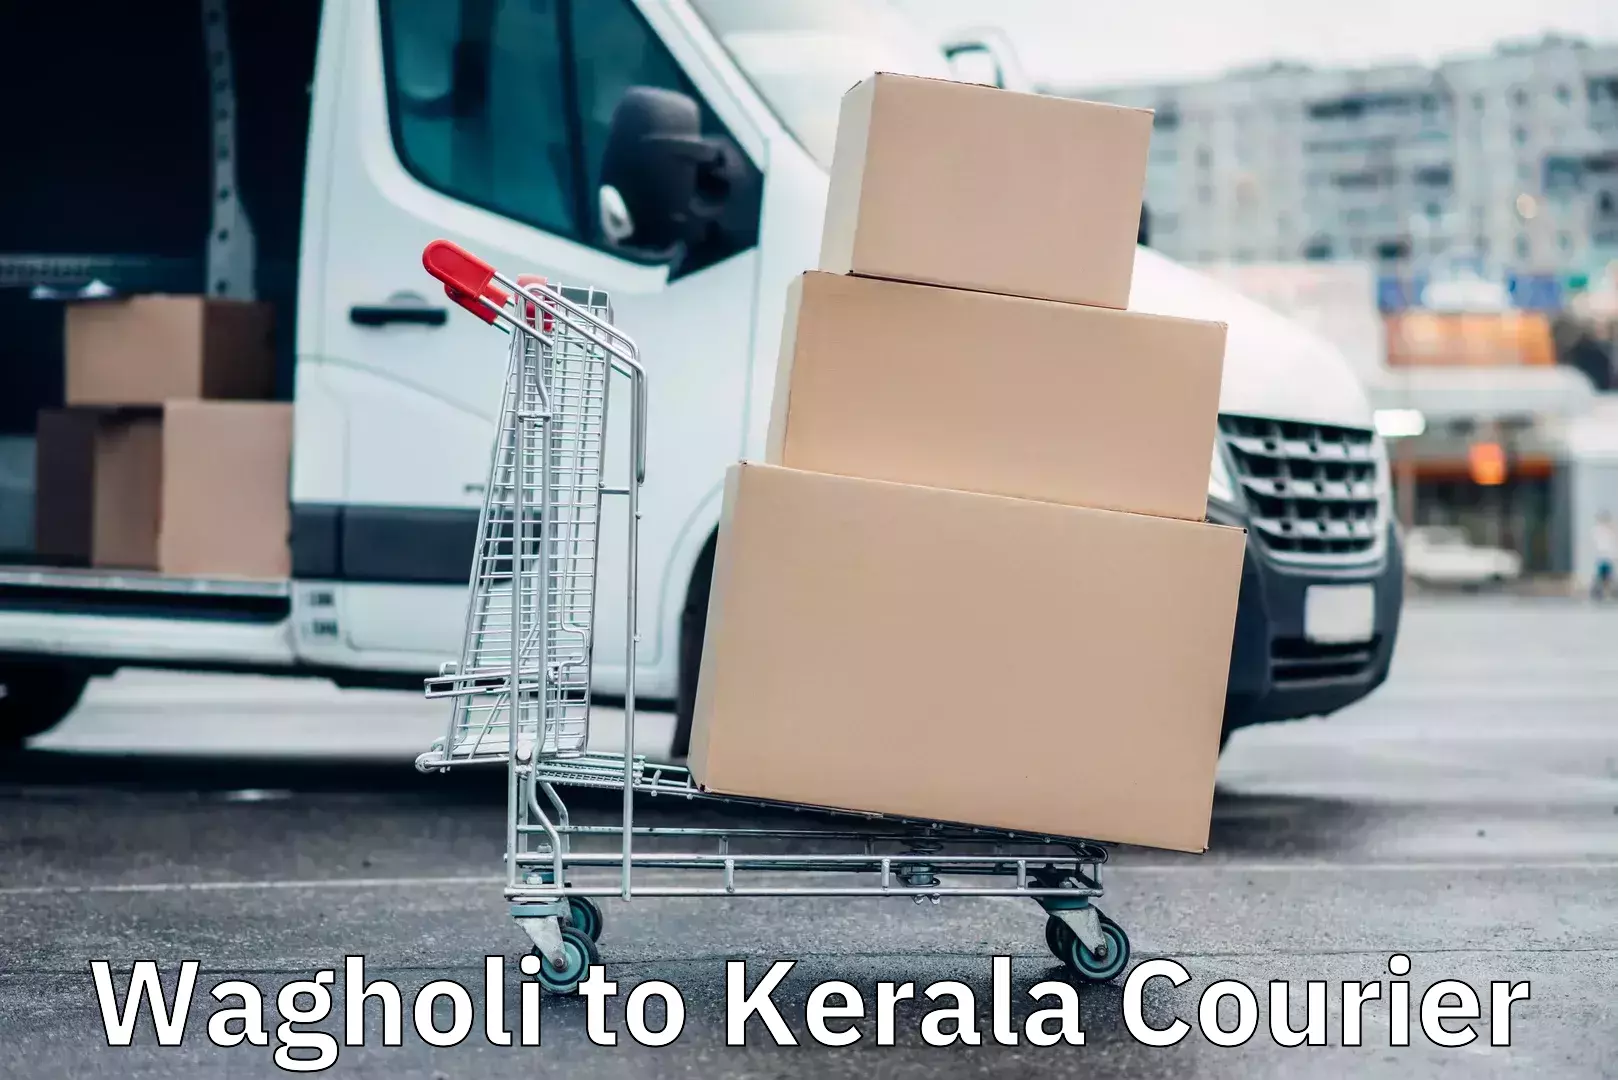 Nationwide parcel services Wagholi to Kerala